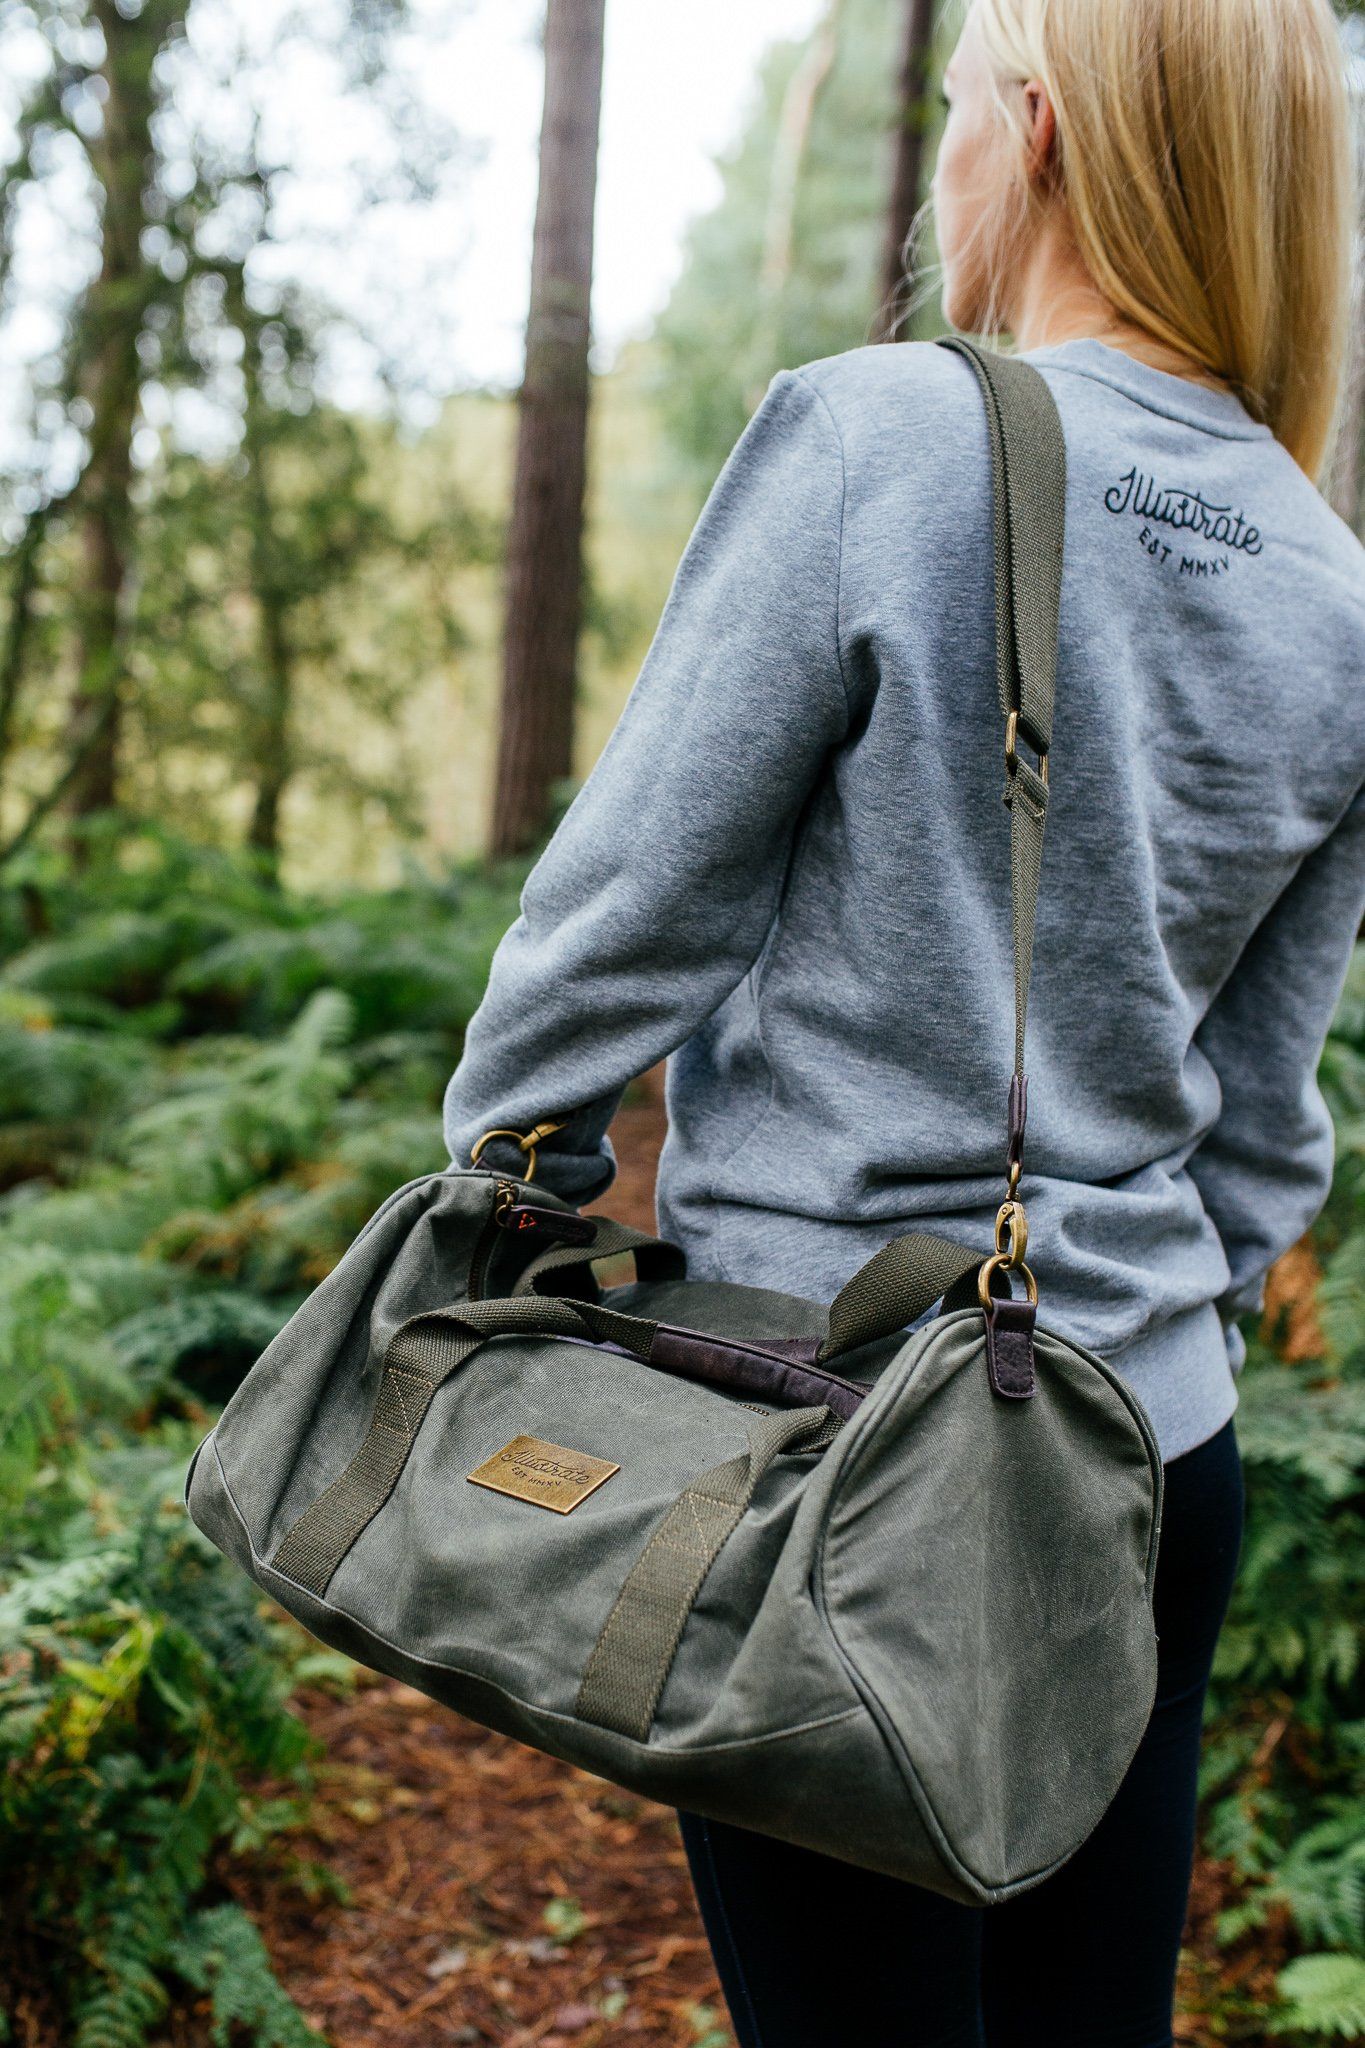 21 Timeless Waxed Canvas Duffle Bags Options for Travel